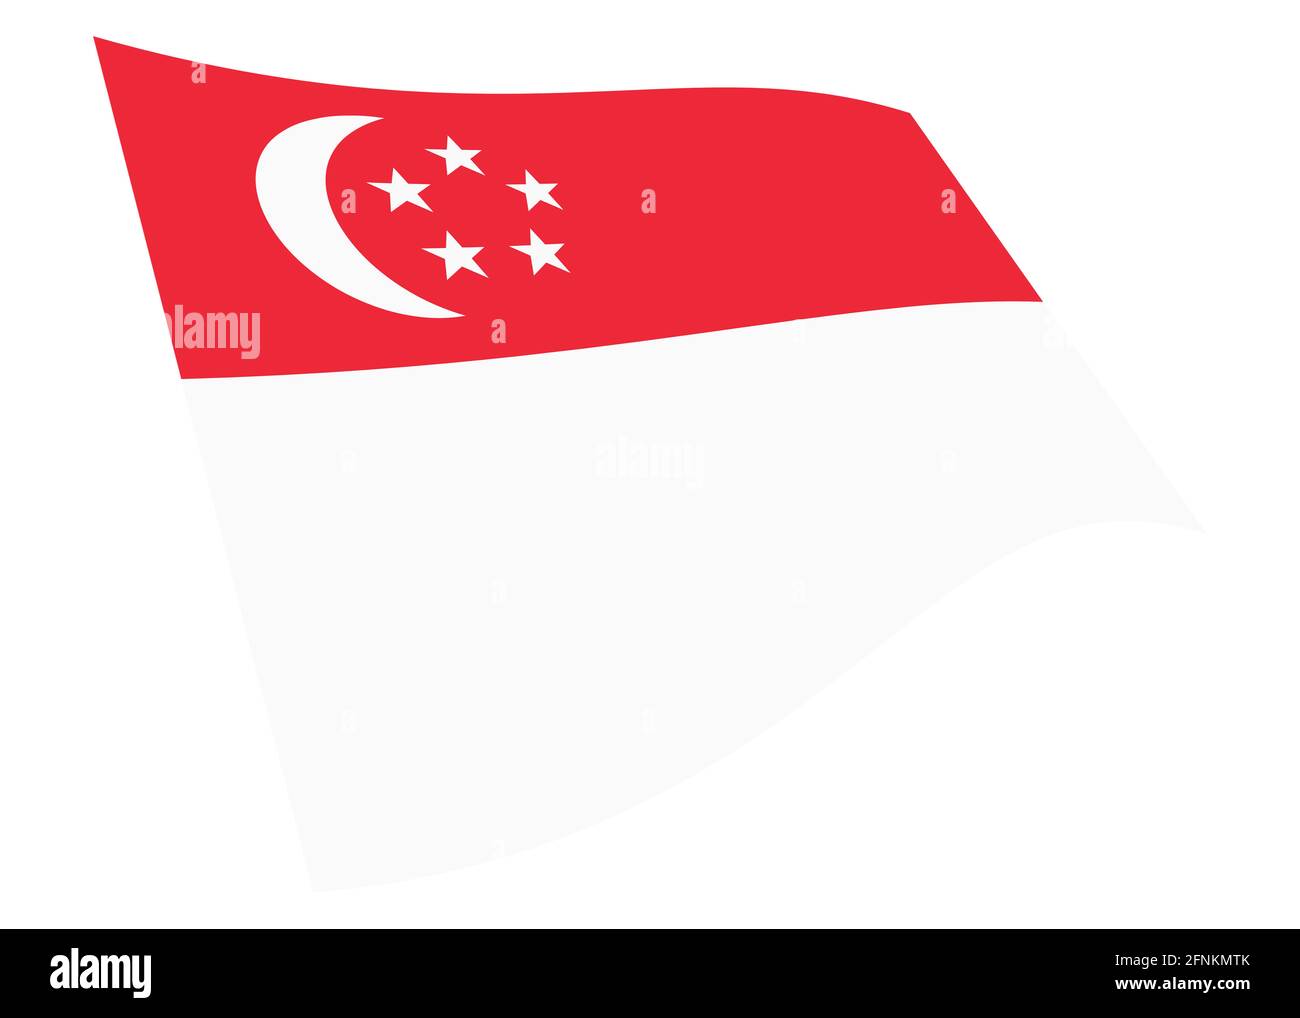 Singapore waving flag graphic isolated on white with clipping path 3d illustration Stock Photo